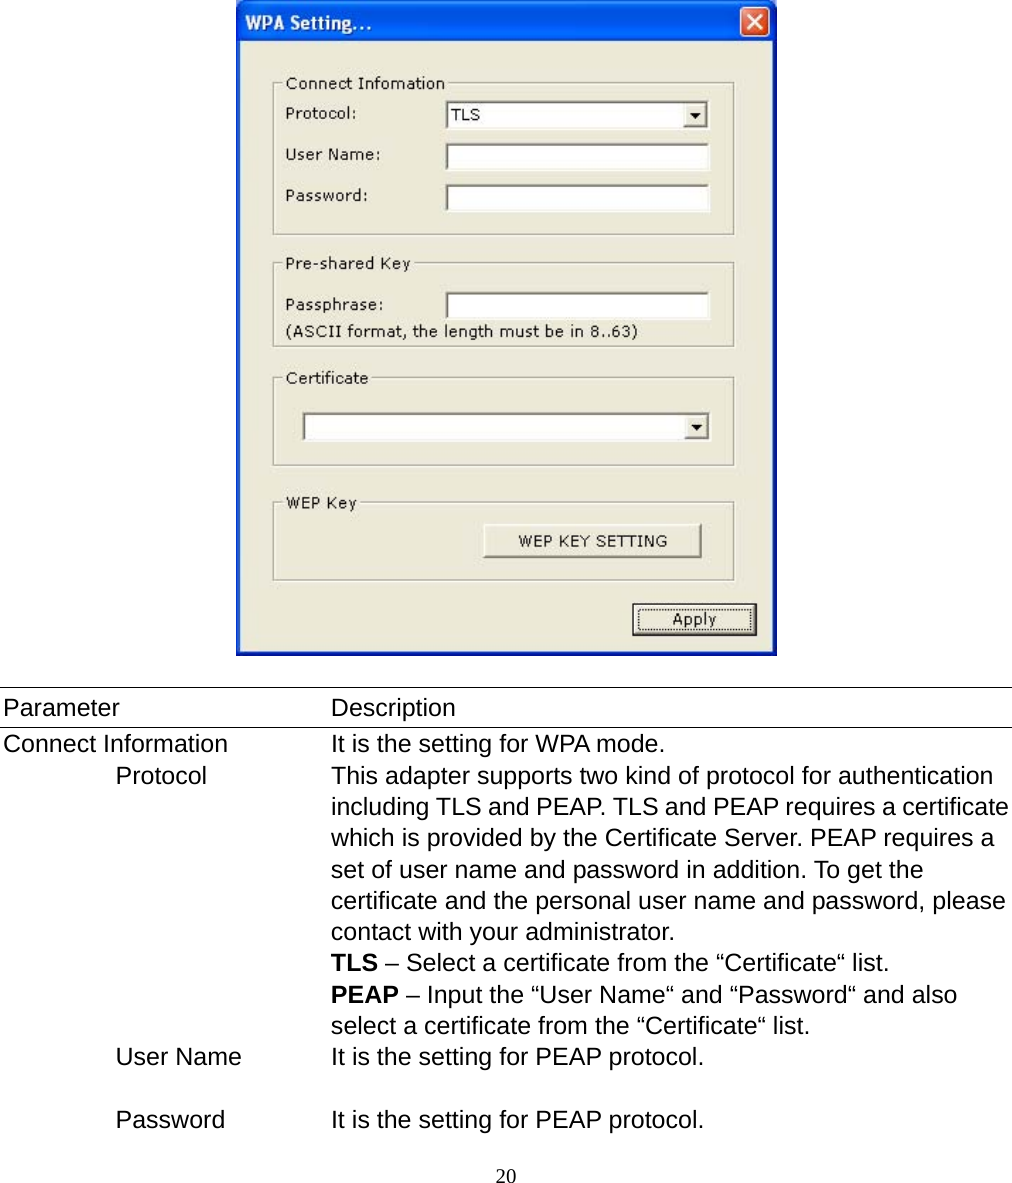  20              Parameter Description Connect Information  It is the setting for WPA mode.          Protocol  This adapter supports two kind of protocol for authentication including TLS and PEAP. TLS and PEAP requires a certificate which is provided by the Certificate Server. PEAP requires a set of user name and password in addition. To get the certificate and the personal user name and password, please contact with your administrator. TLS – Select a certificate from the “Certificate“ list. PEAP – Input the “User Name“ and “Password“ and also select a certificate from the “Certificate“ list.          User Name  It is the setting for PEAP protocol.            Password  It is the setting for PEAP protocol. 